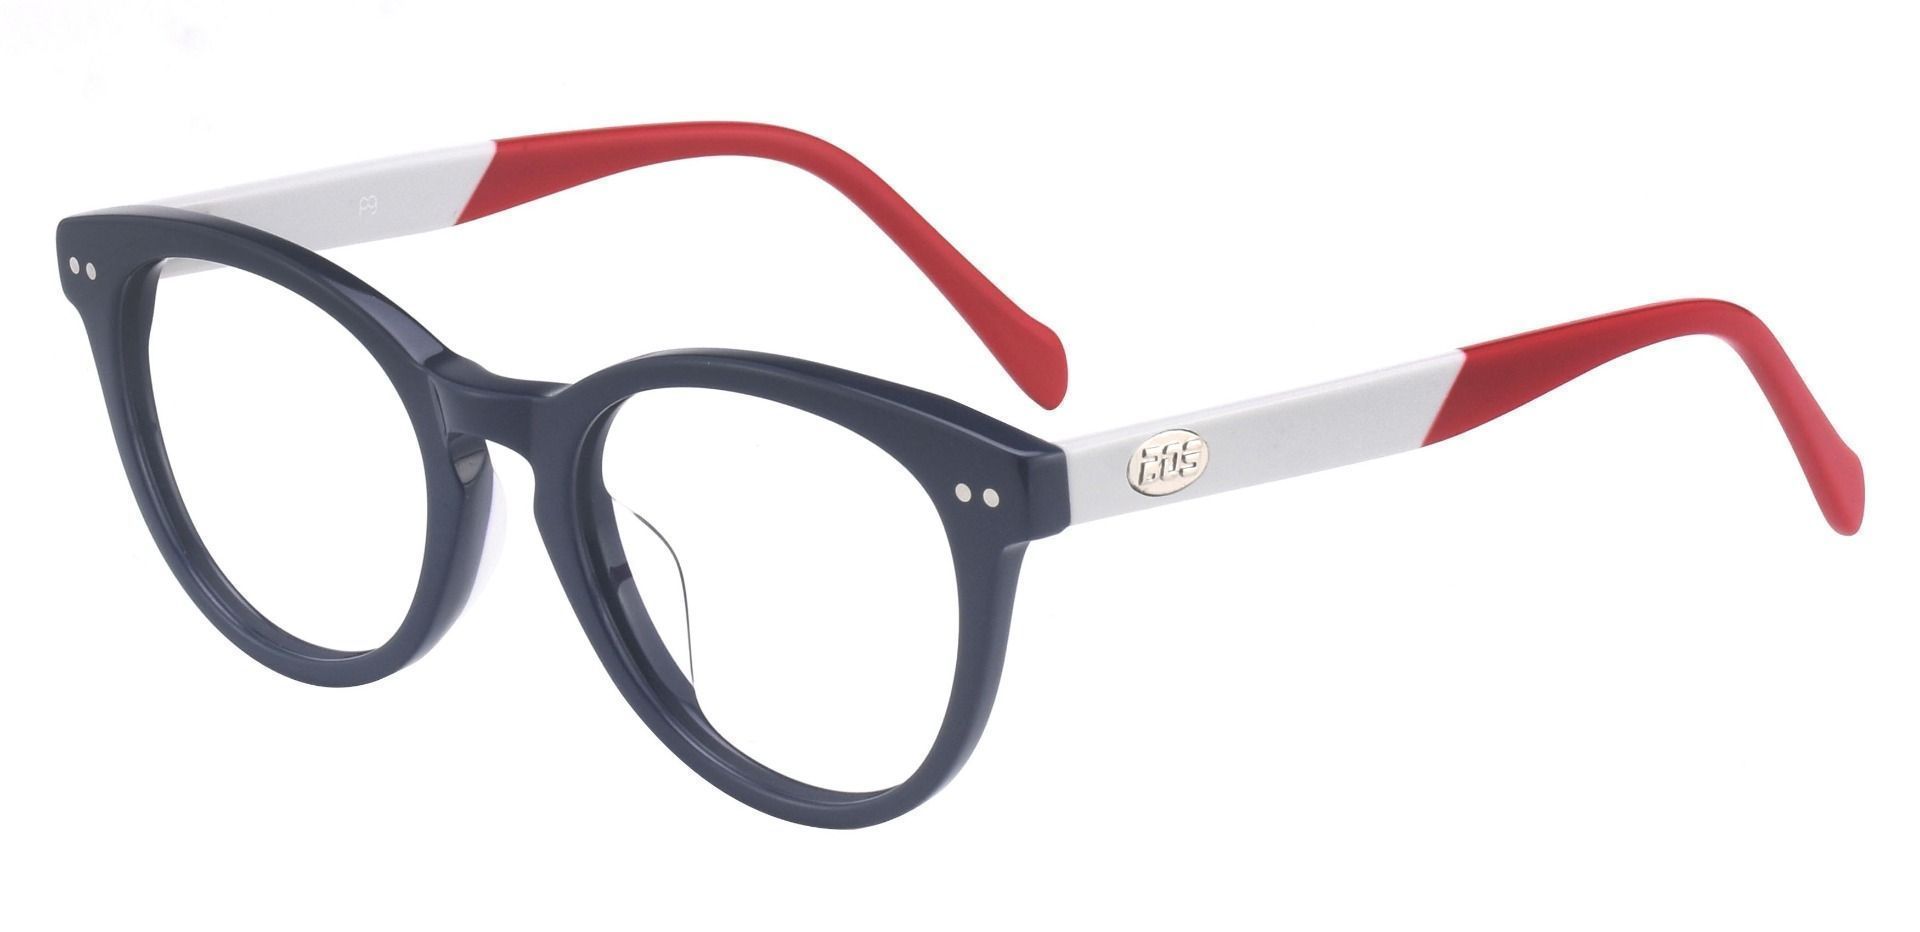 Revere Oval Blue Light Blocking Glasses - The Frame Is Blue And Red